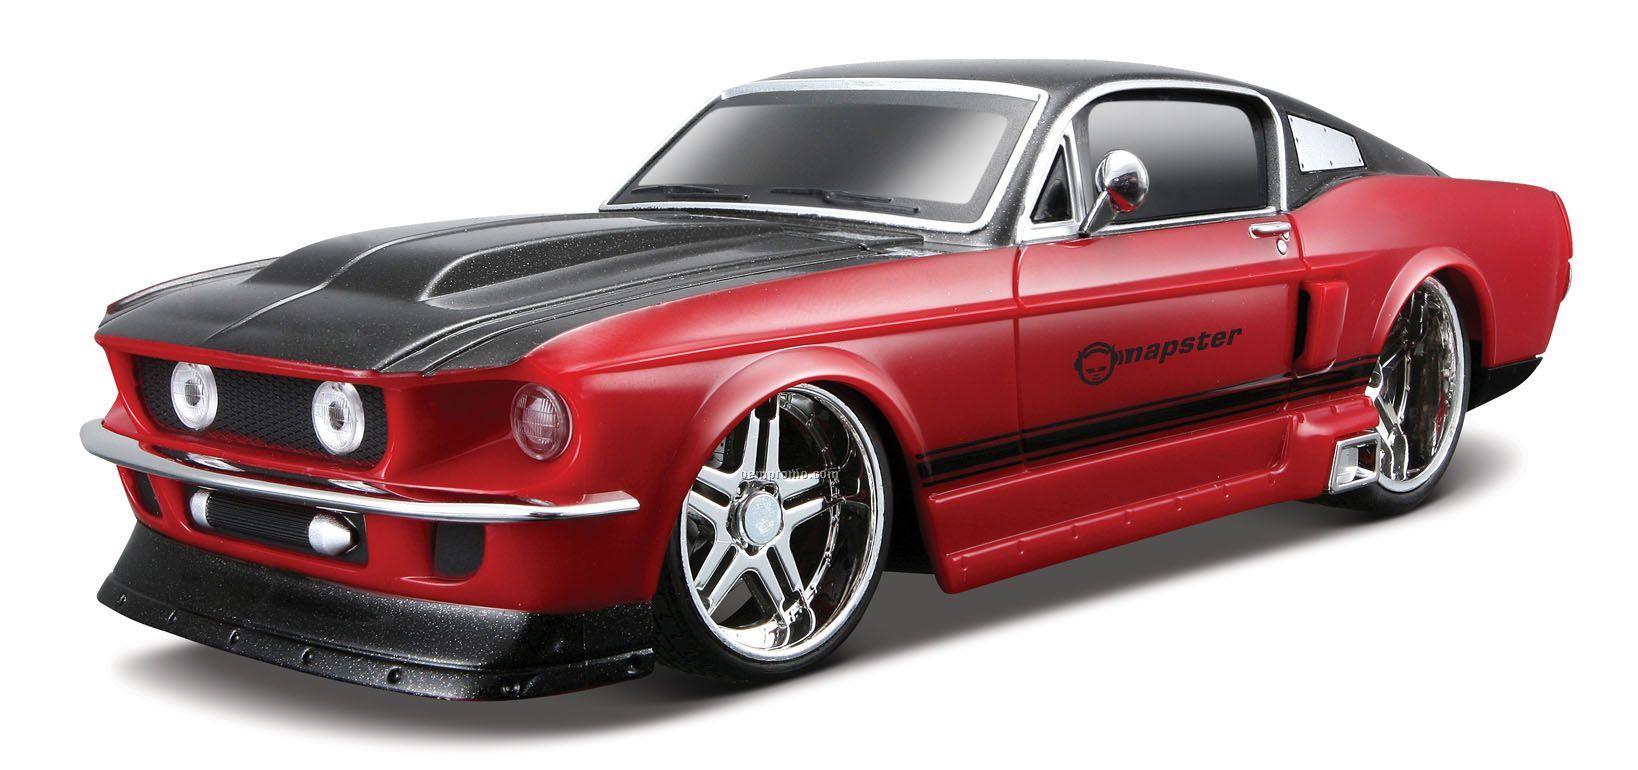 1/24 Scale 7" Remote Control Car 1967 Ford Mustang Gt